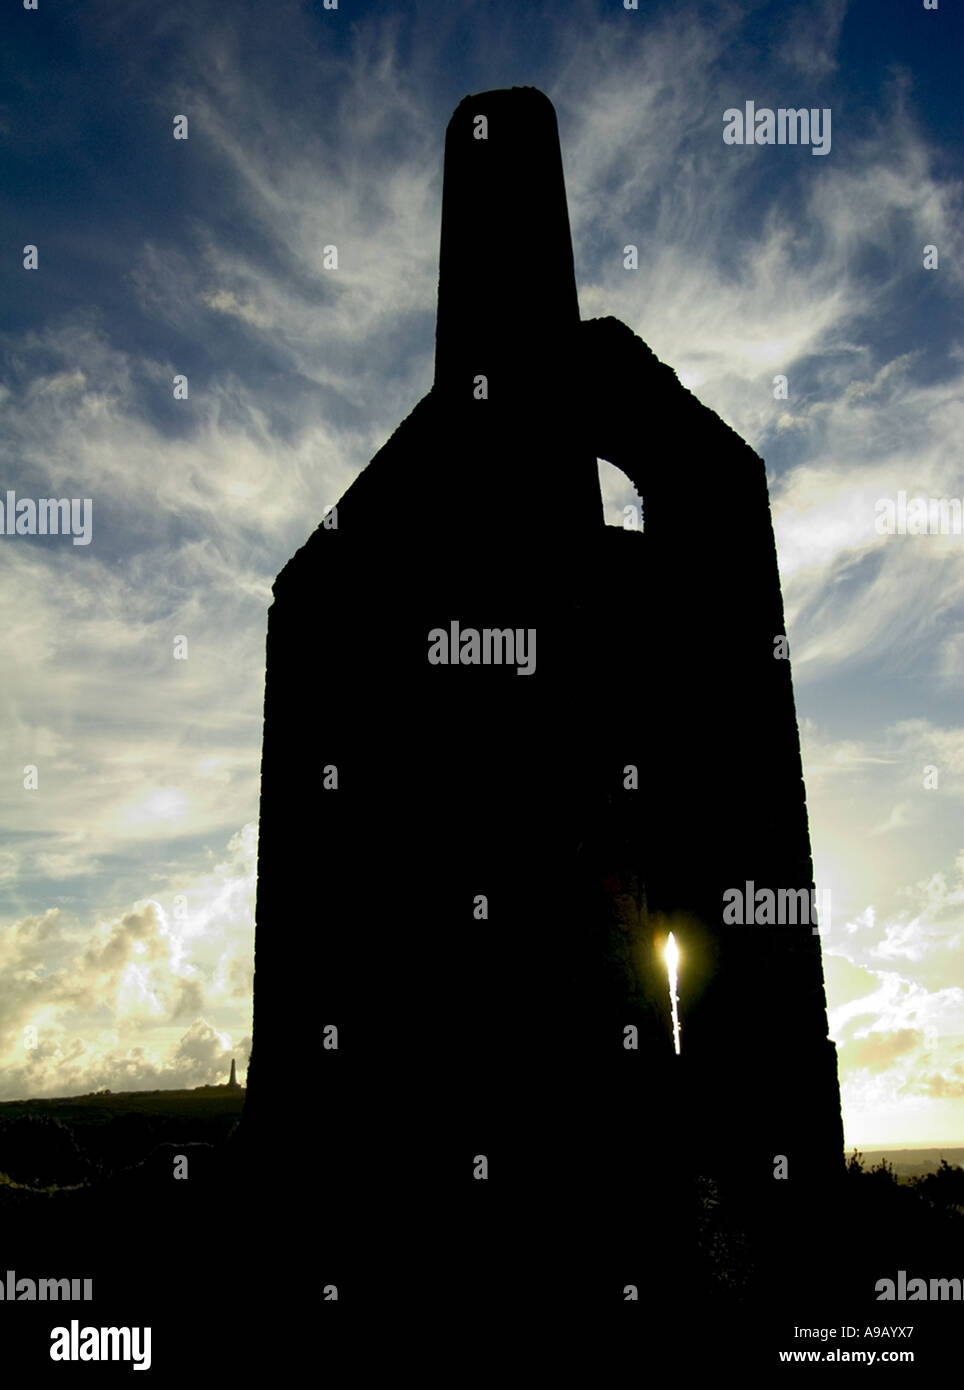 Engine house in silhouette Stock Photo